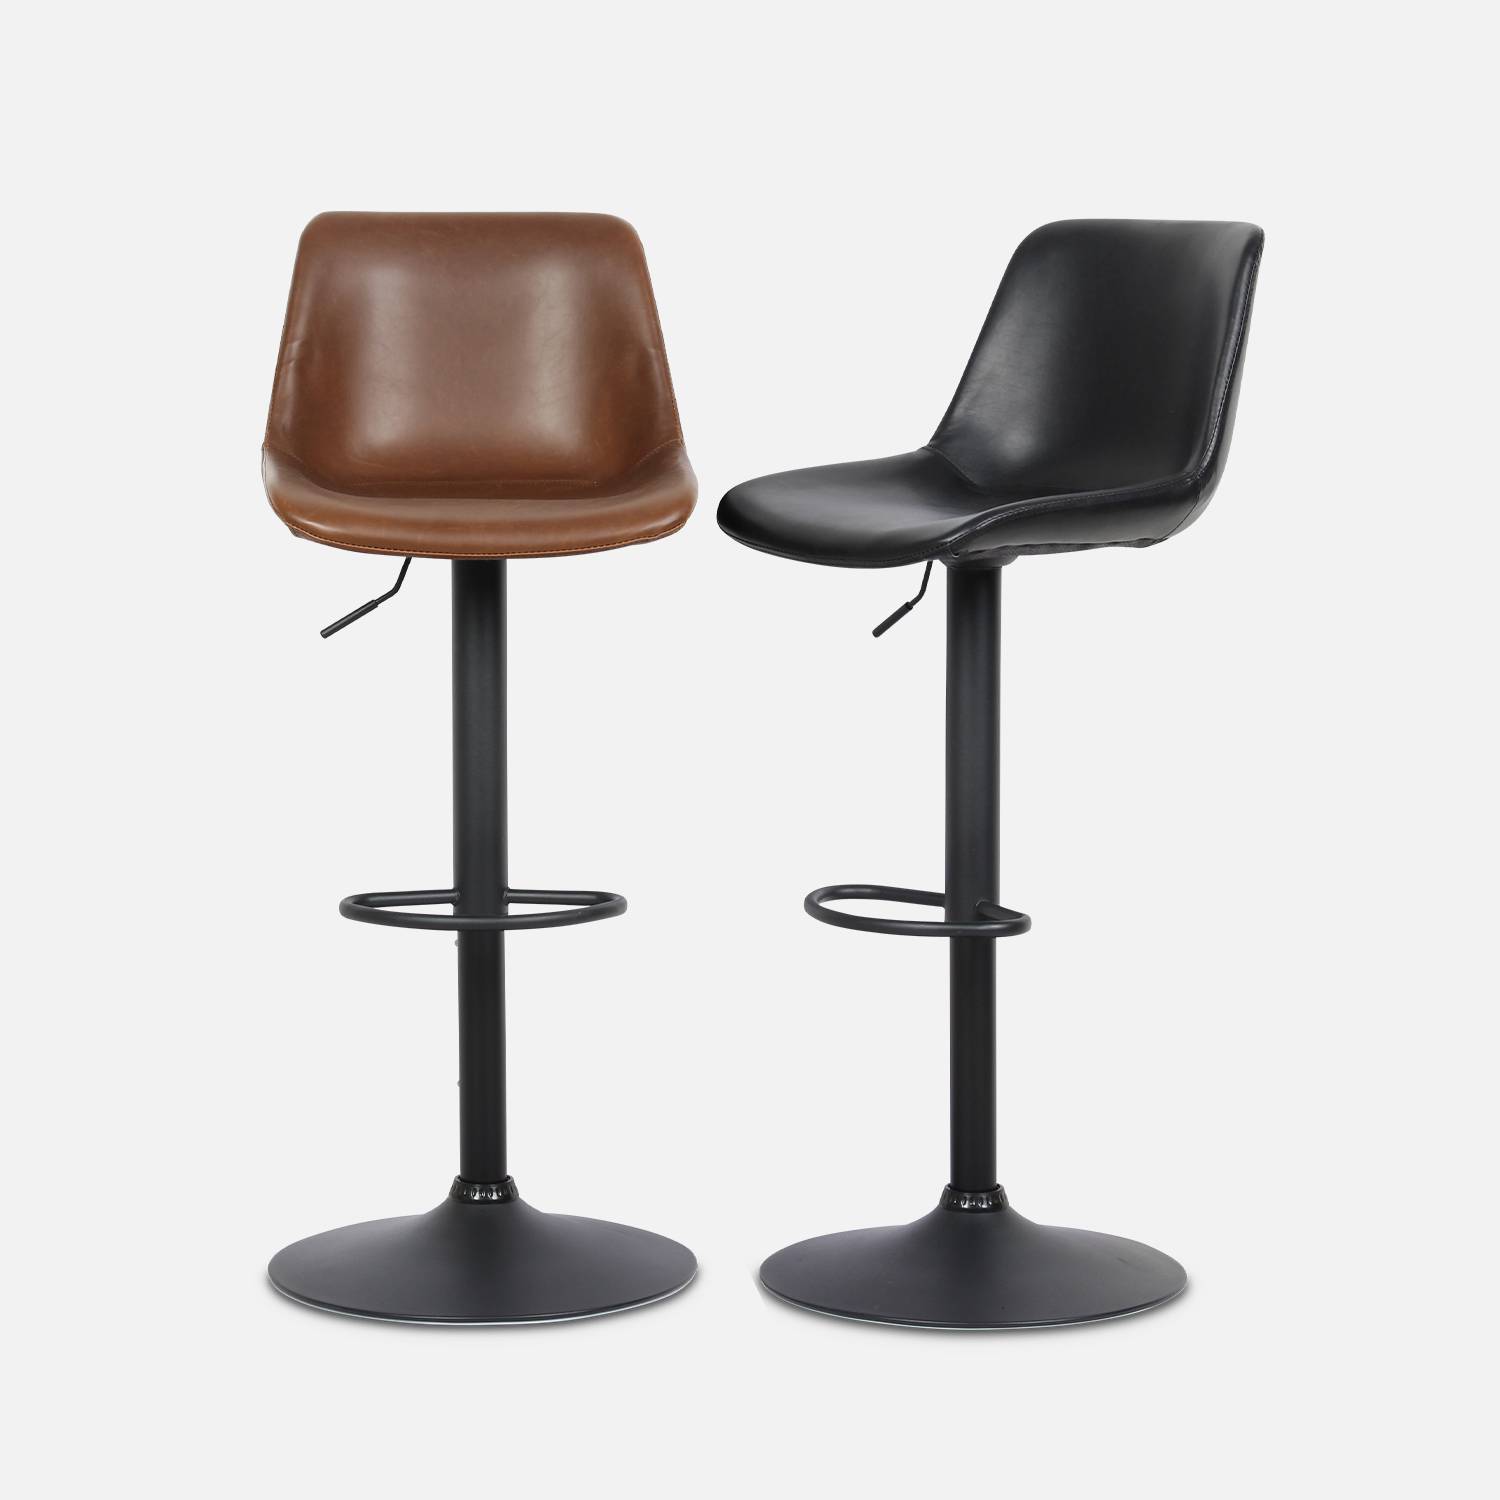 Pair of faux leather, square backrest, adjustable bar stools, seat height 61.5 - 83.5cm - Noah - Black Photo8